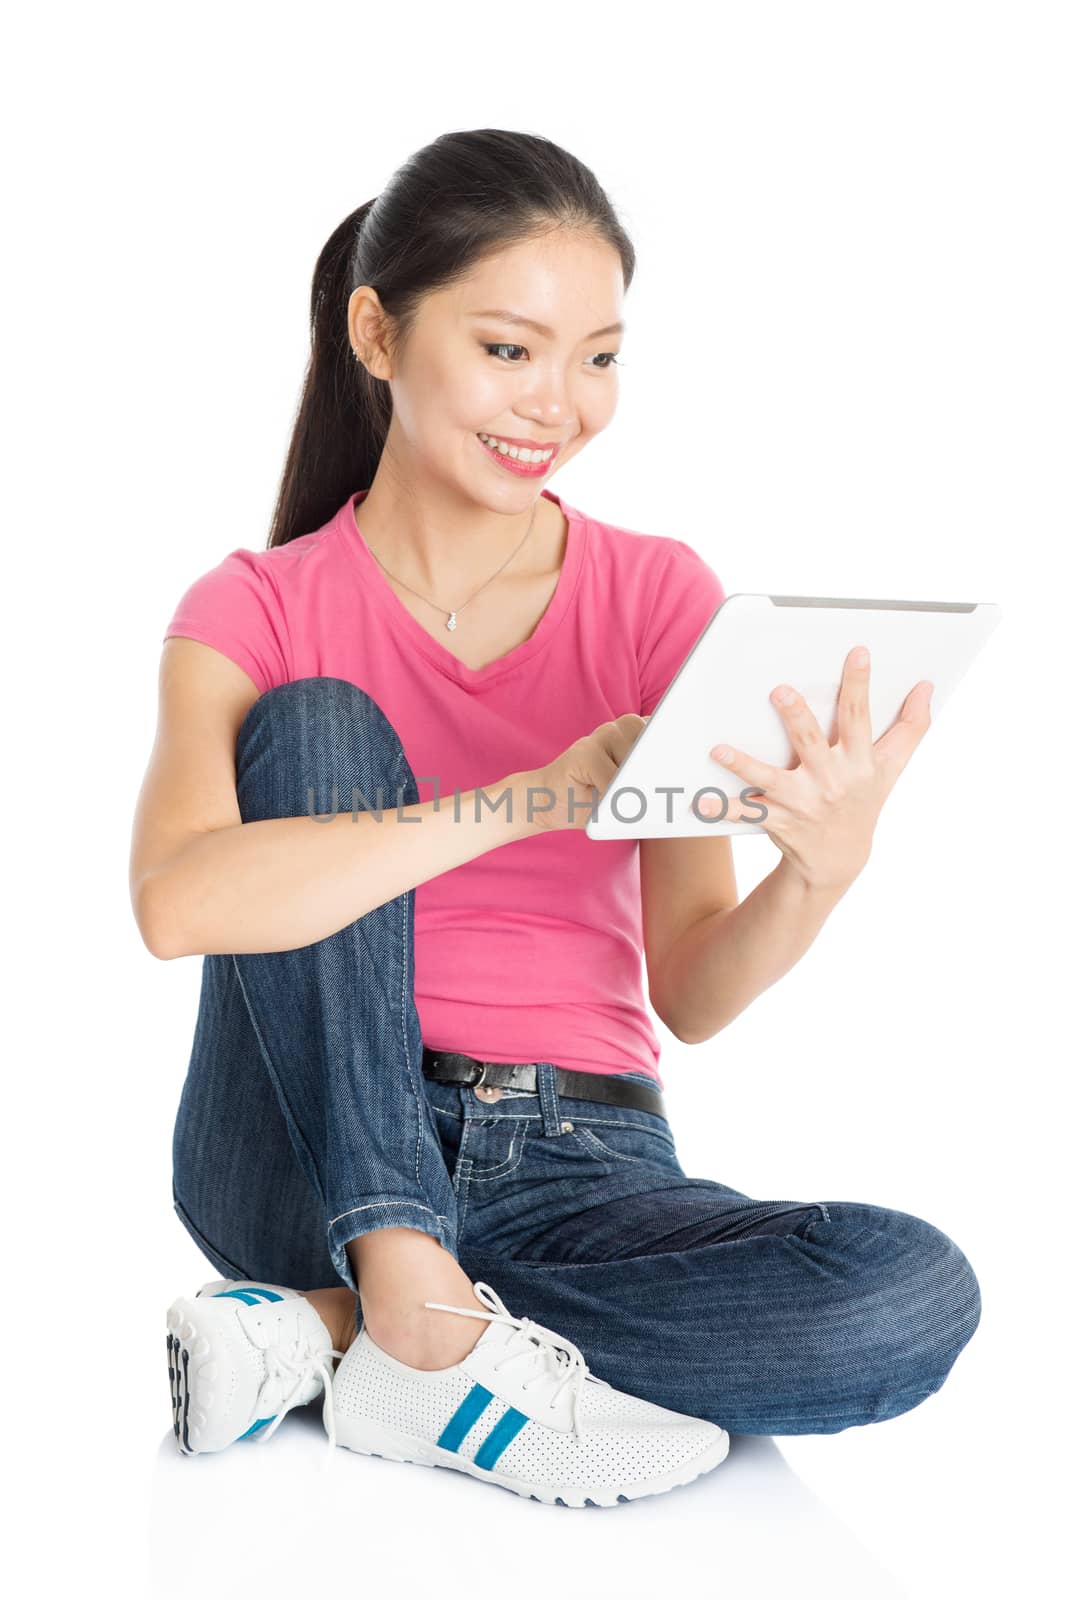 Full body young Asian girl in pink shirt using digital tablet pc, seated on floor, full length isolated on white background.